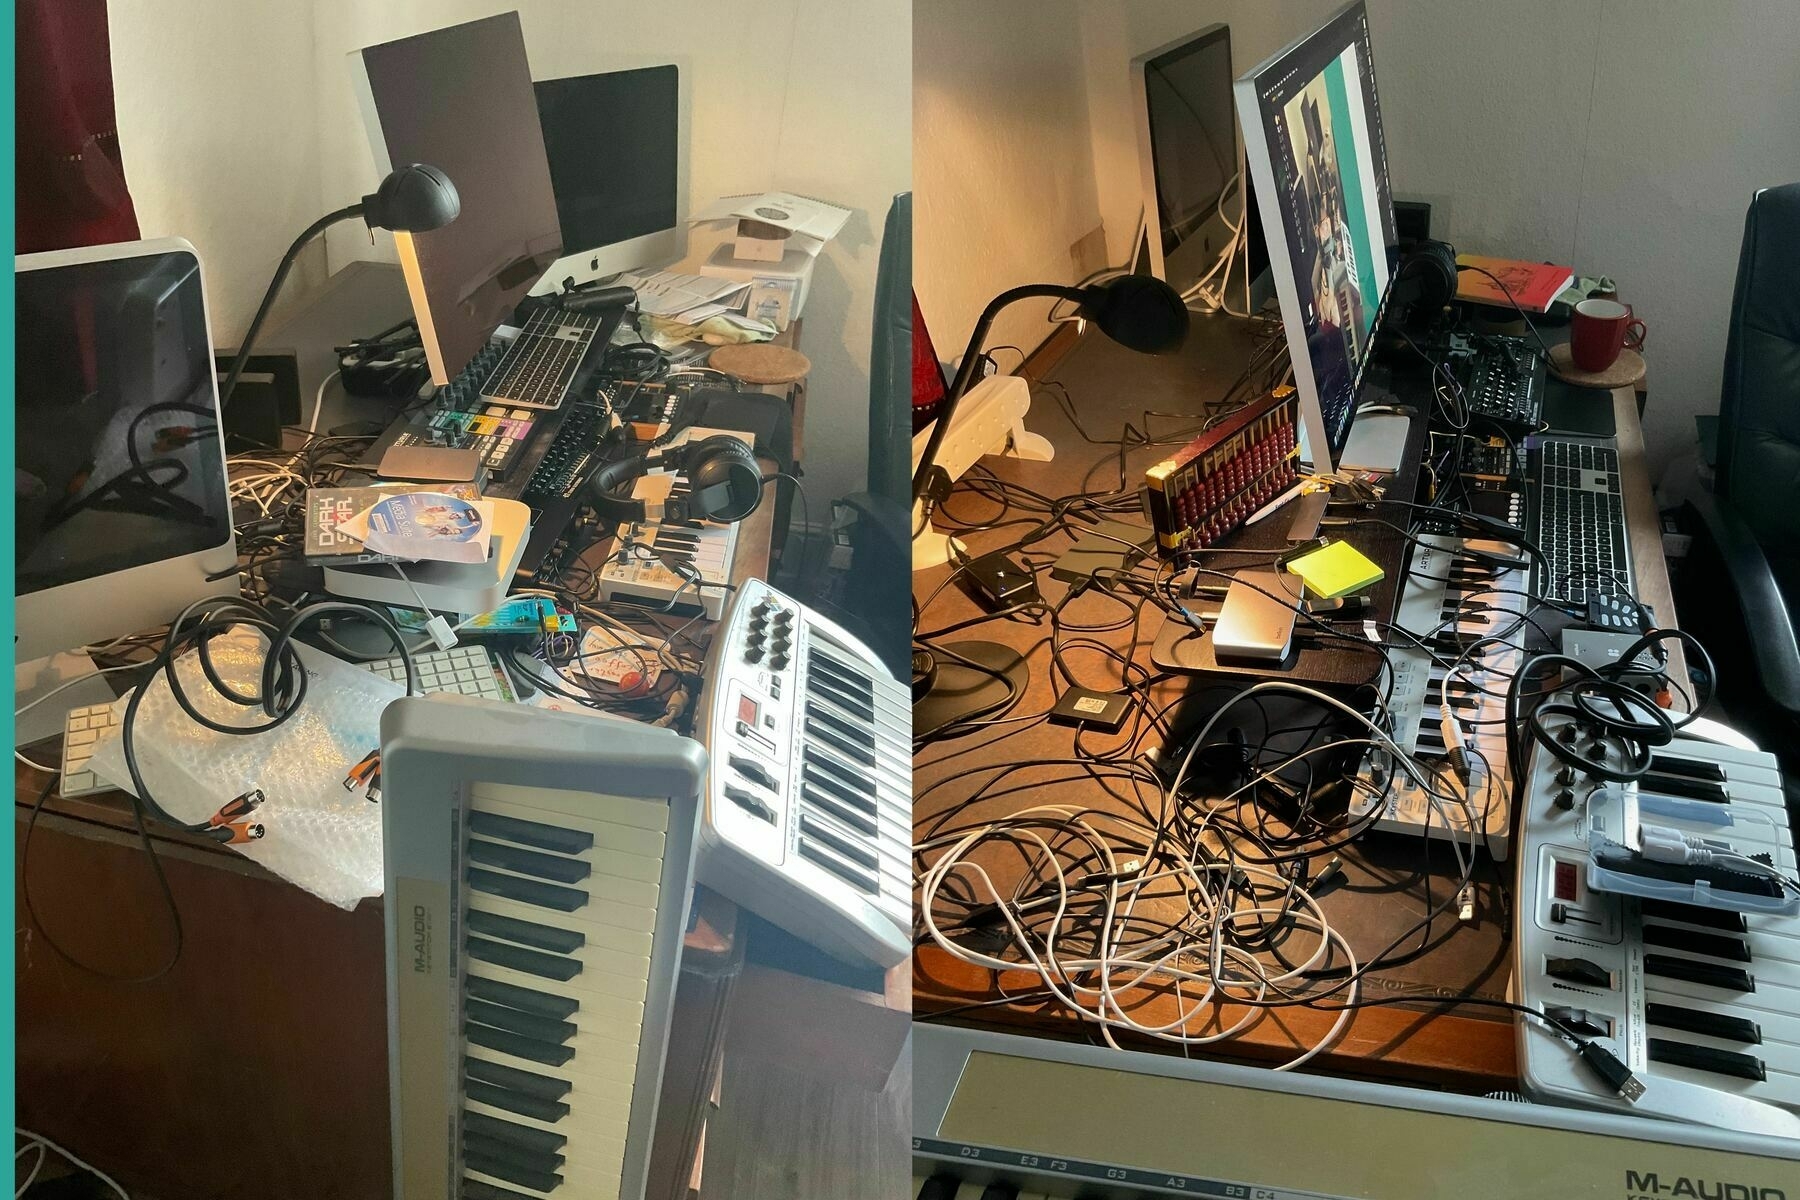 Two views of a desk containing computers and musical keyboards and all the associated wires and gubbins. The view on the left is before the desk was tidied and the one on the right is after being tidied - although there is little difference. 